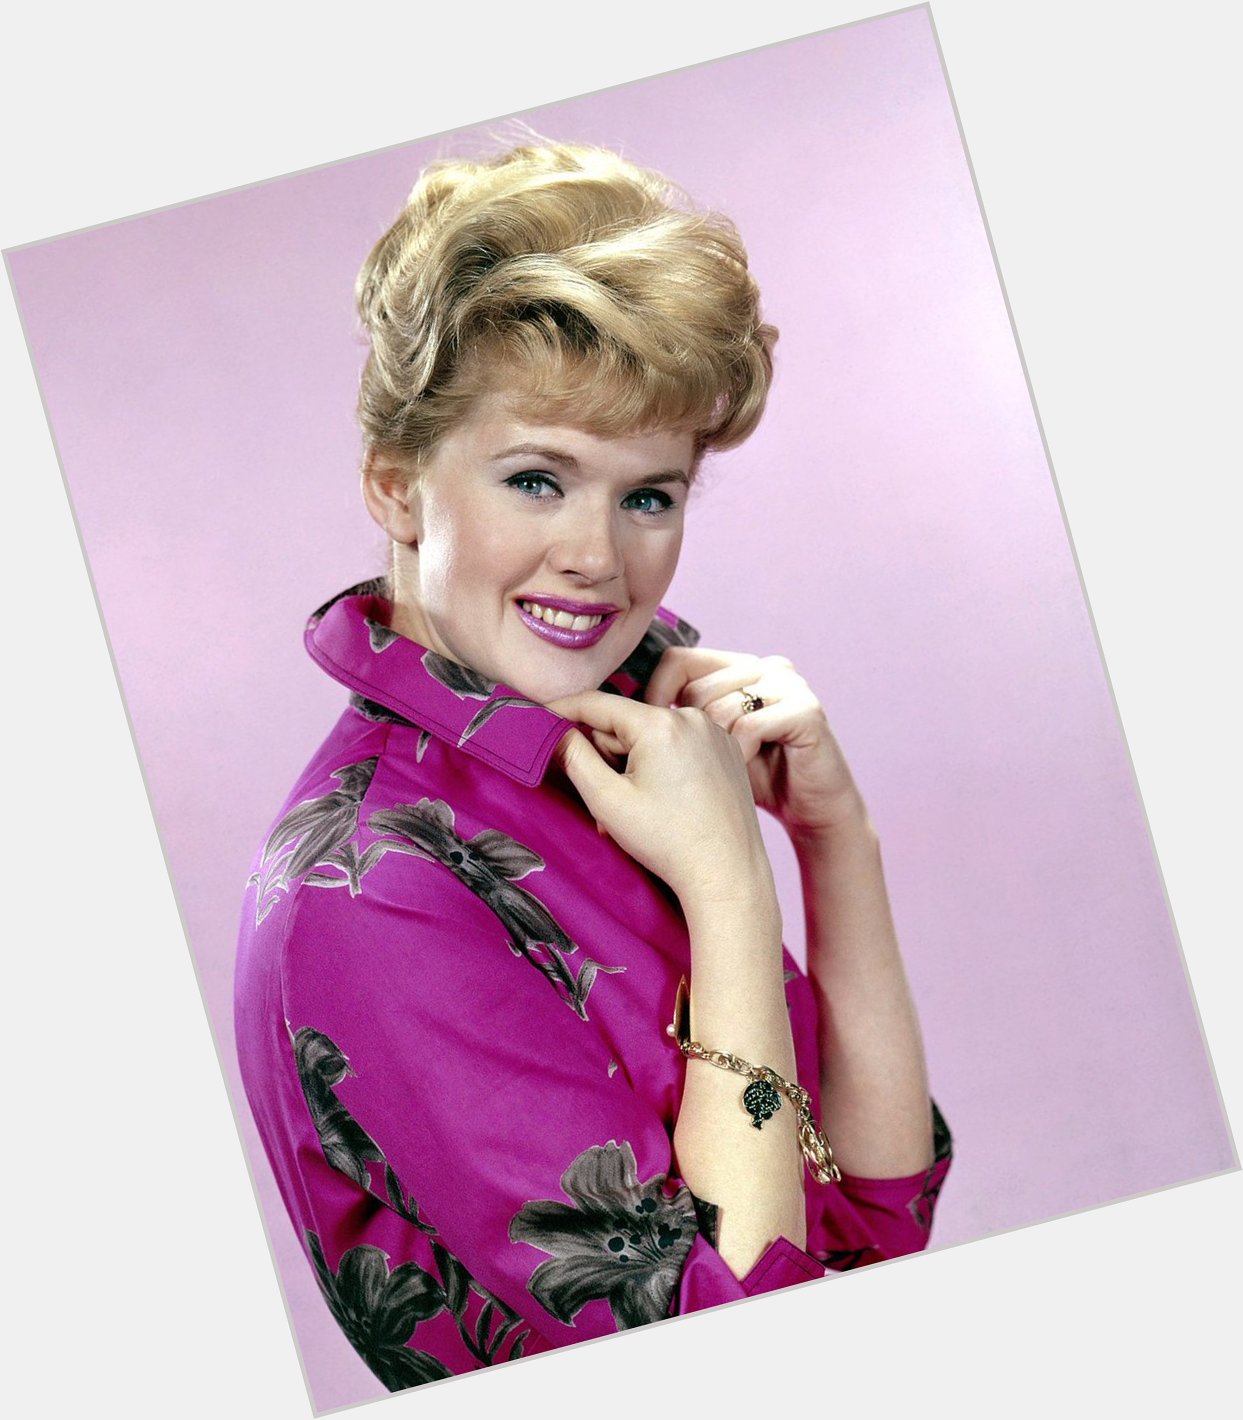 Wishing a very happy 79th birthday to Connie Stevens! 